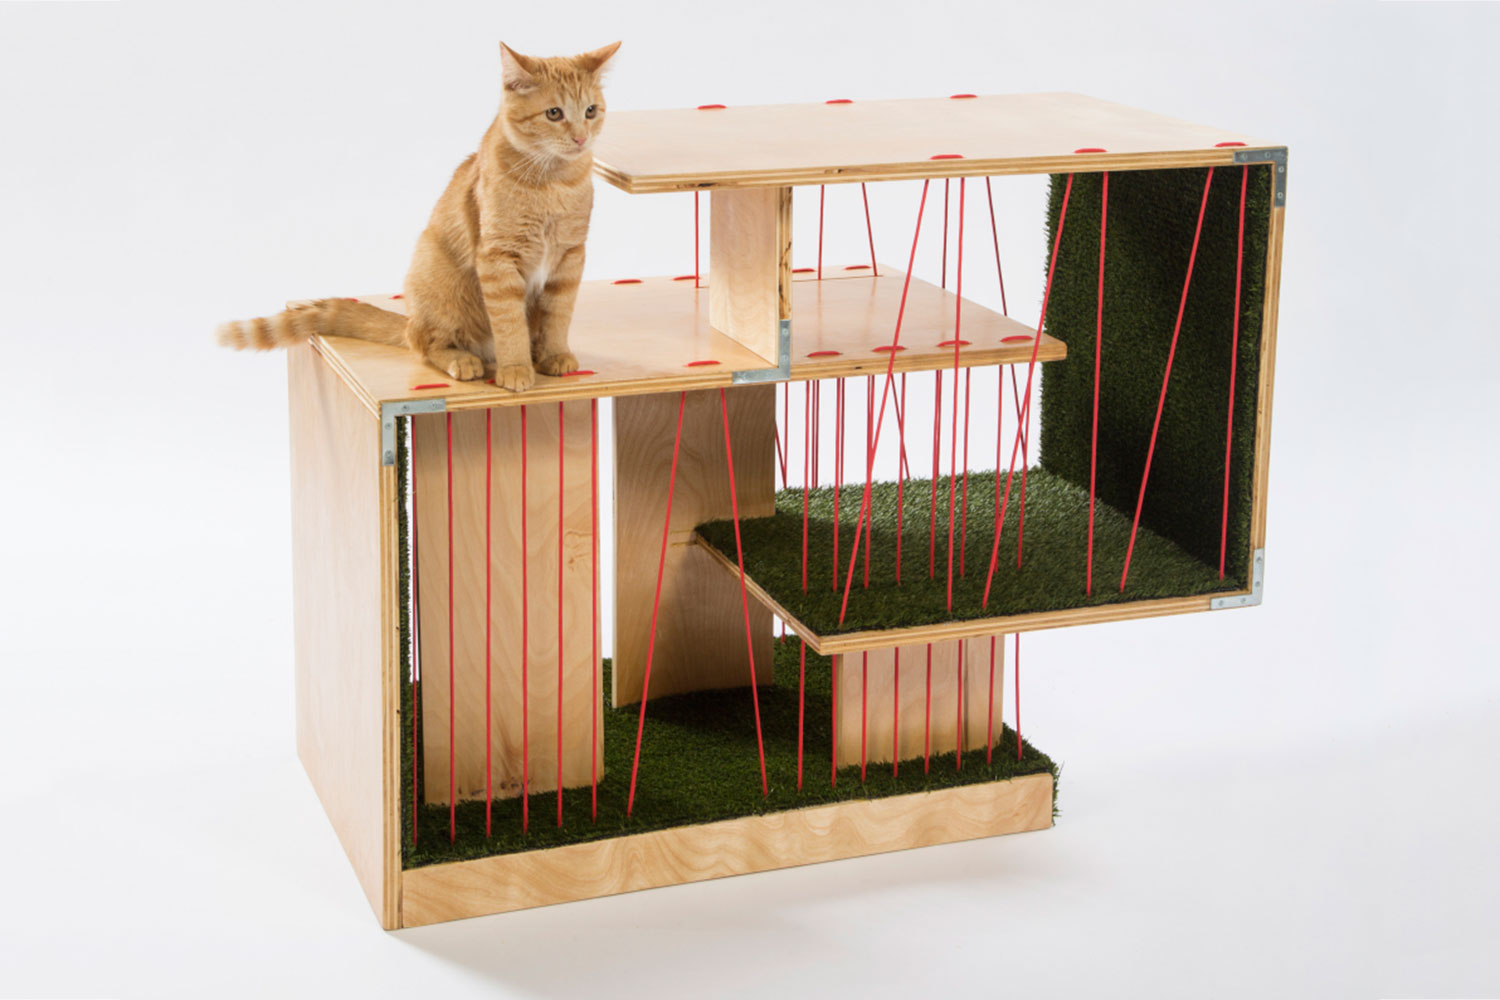 architects for animals design amazing cat houses rnldesign photo credit meghan bob photography